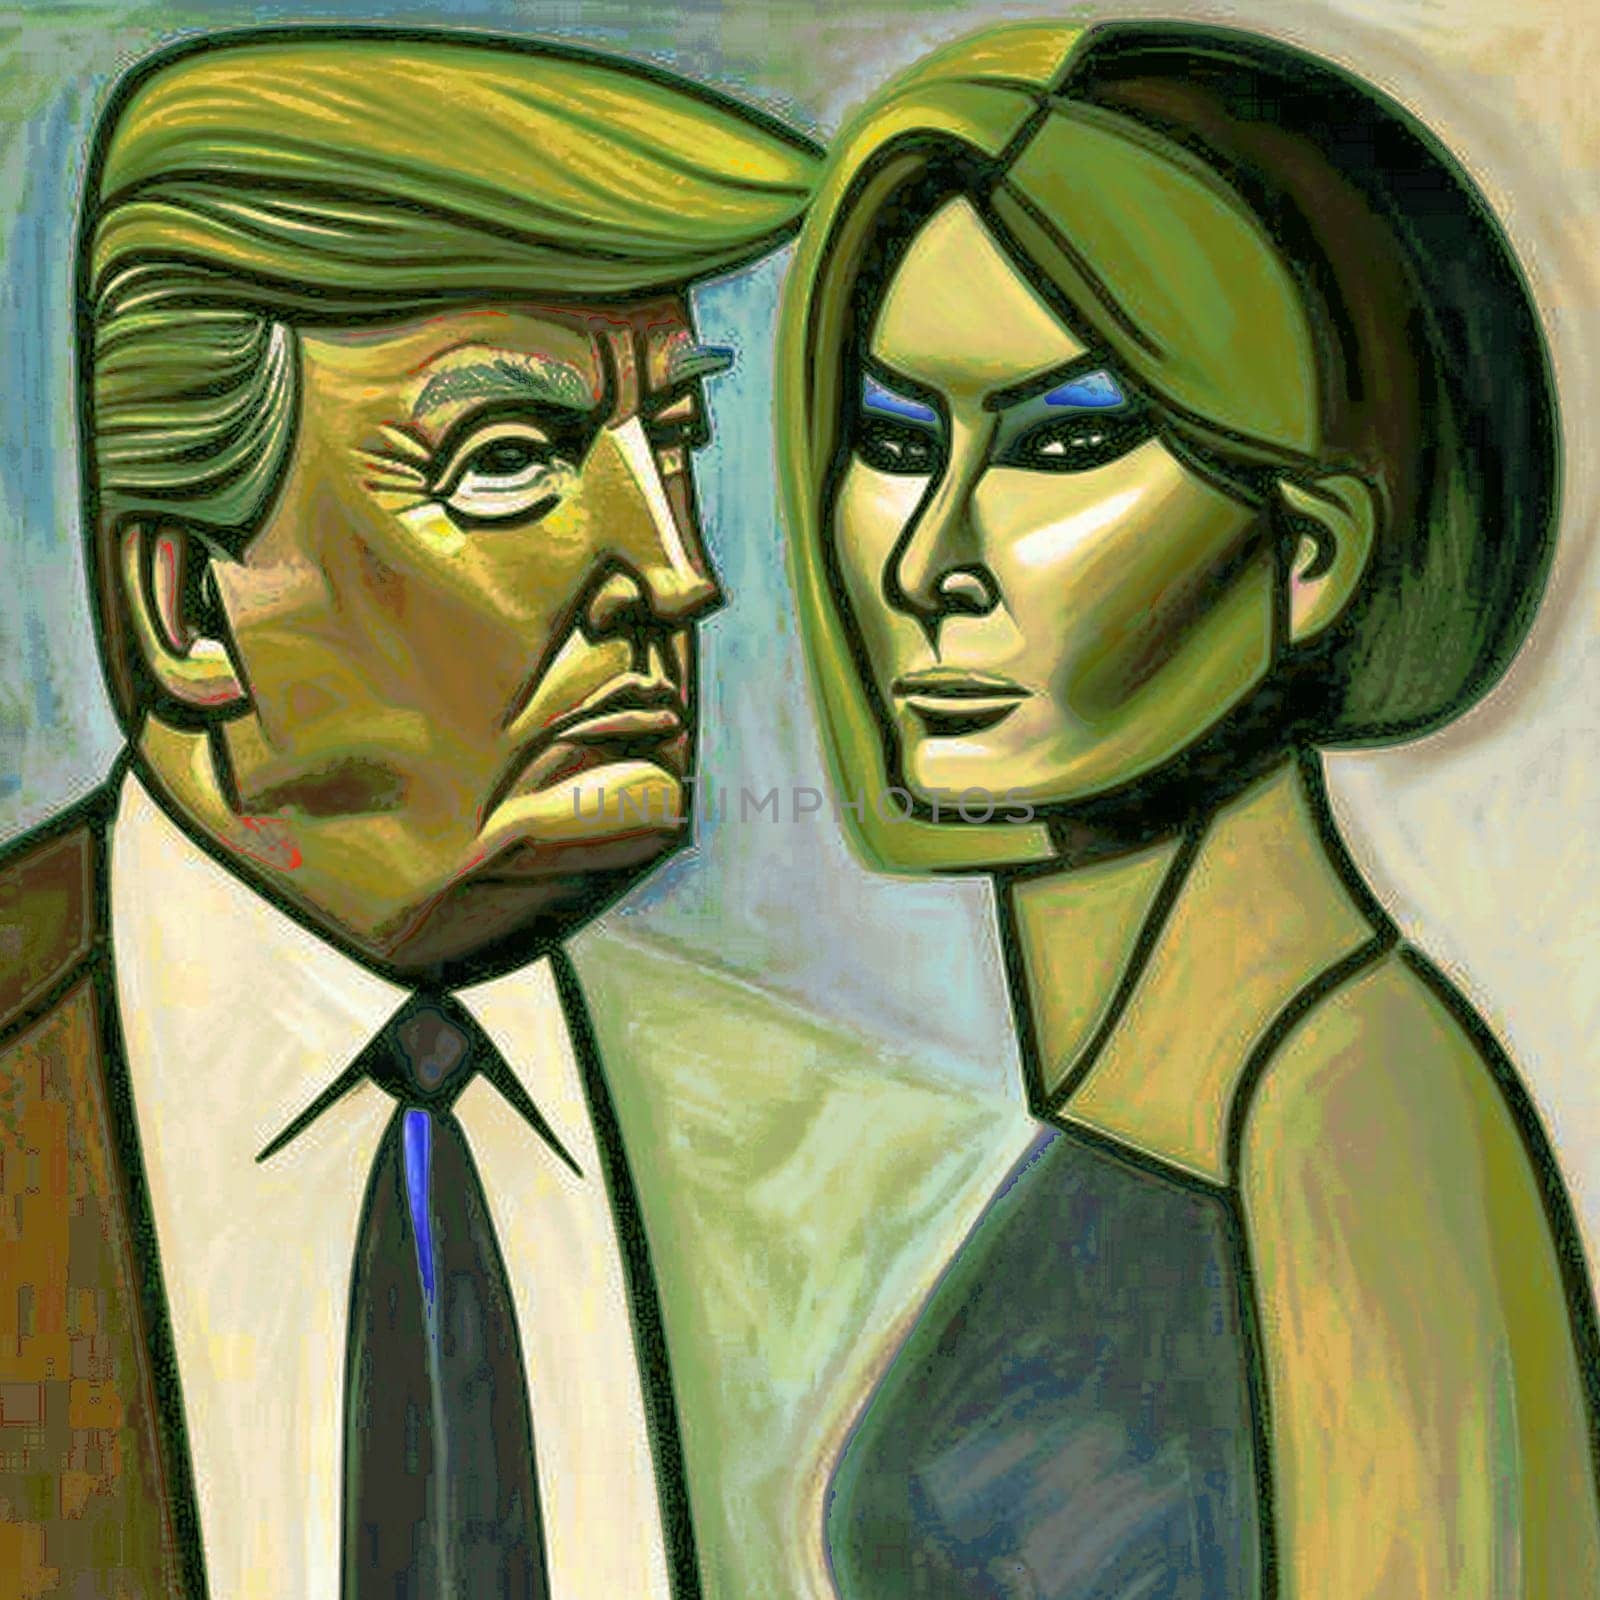 Immerse yourself in this captivating cubist style portrait that encapsulates the essence of Trump and Melania. The AI-generated artwork portrays the couple in a unique and thought-provoking manner, showcasing their influential roles as the President of the United States and his elegant wife.